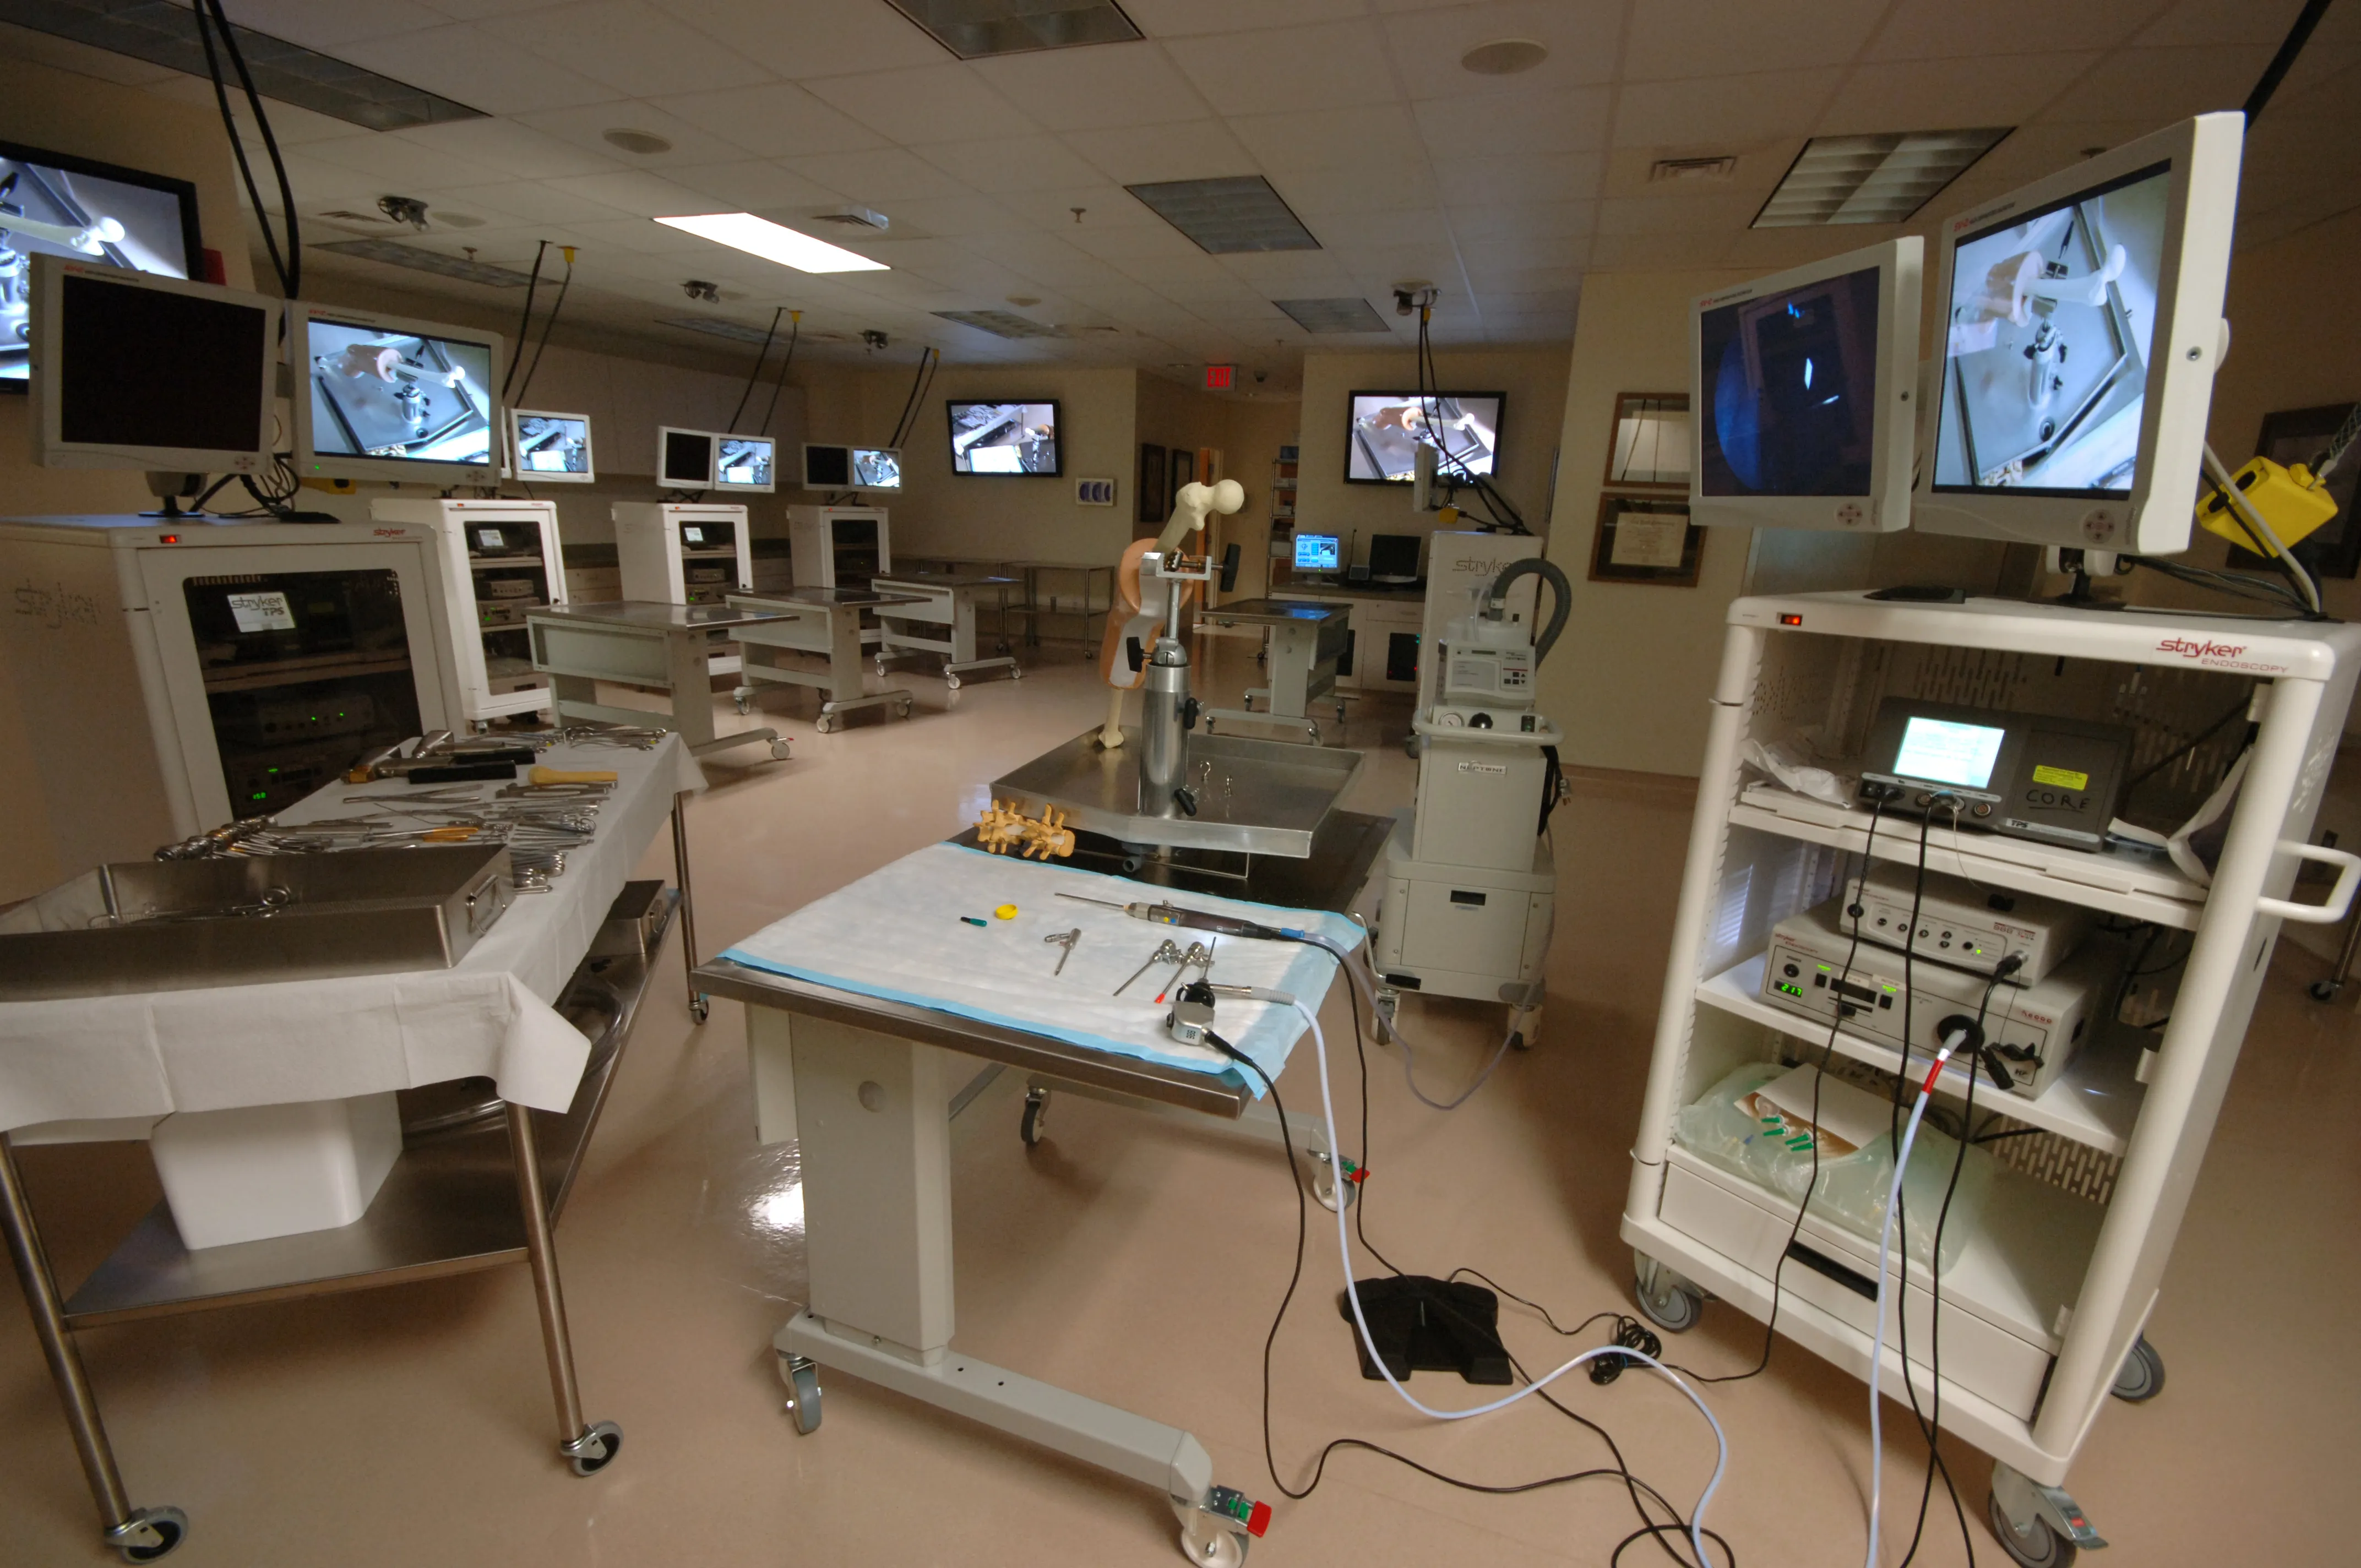 Skills Lab: Full Simulation Setup of Instructor and Students Stations